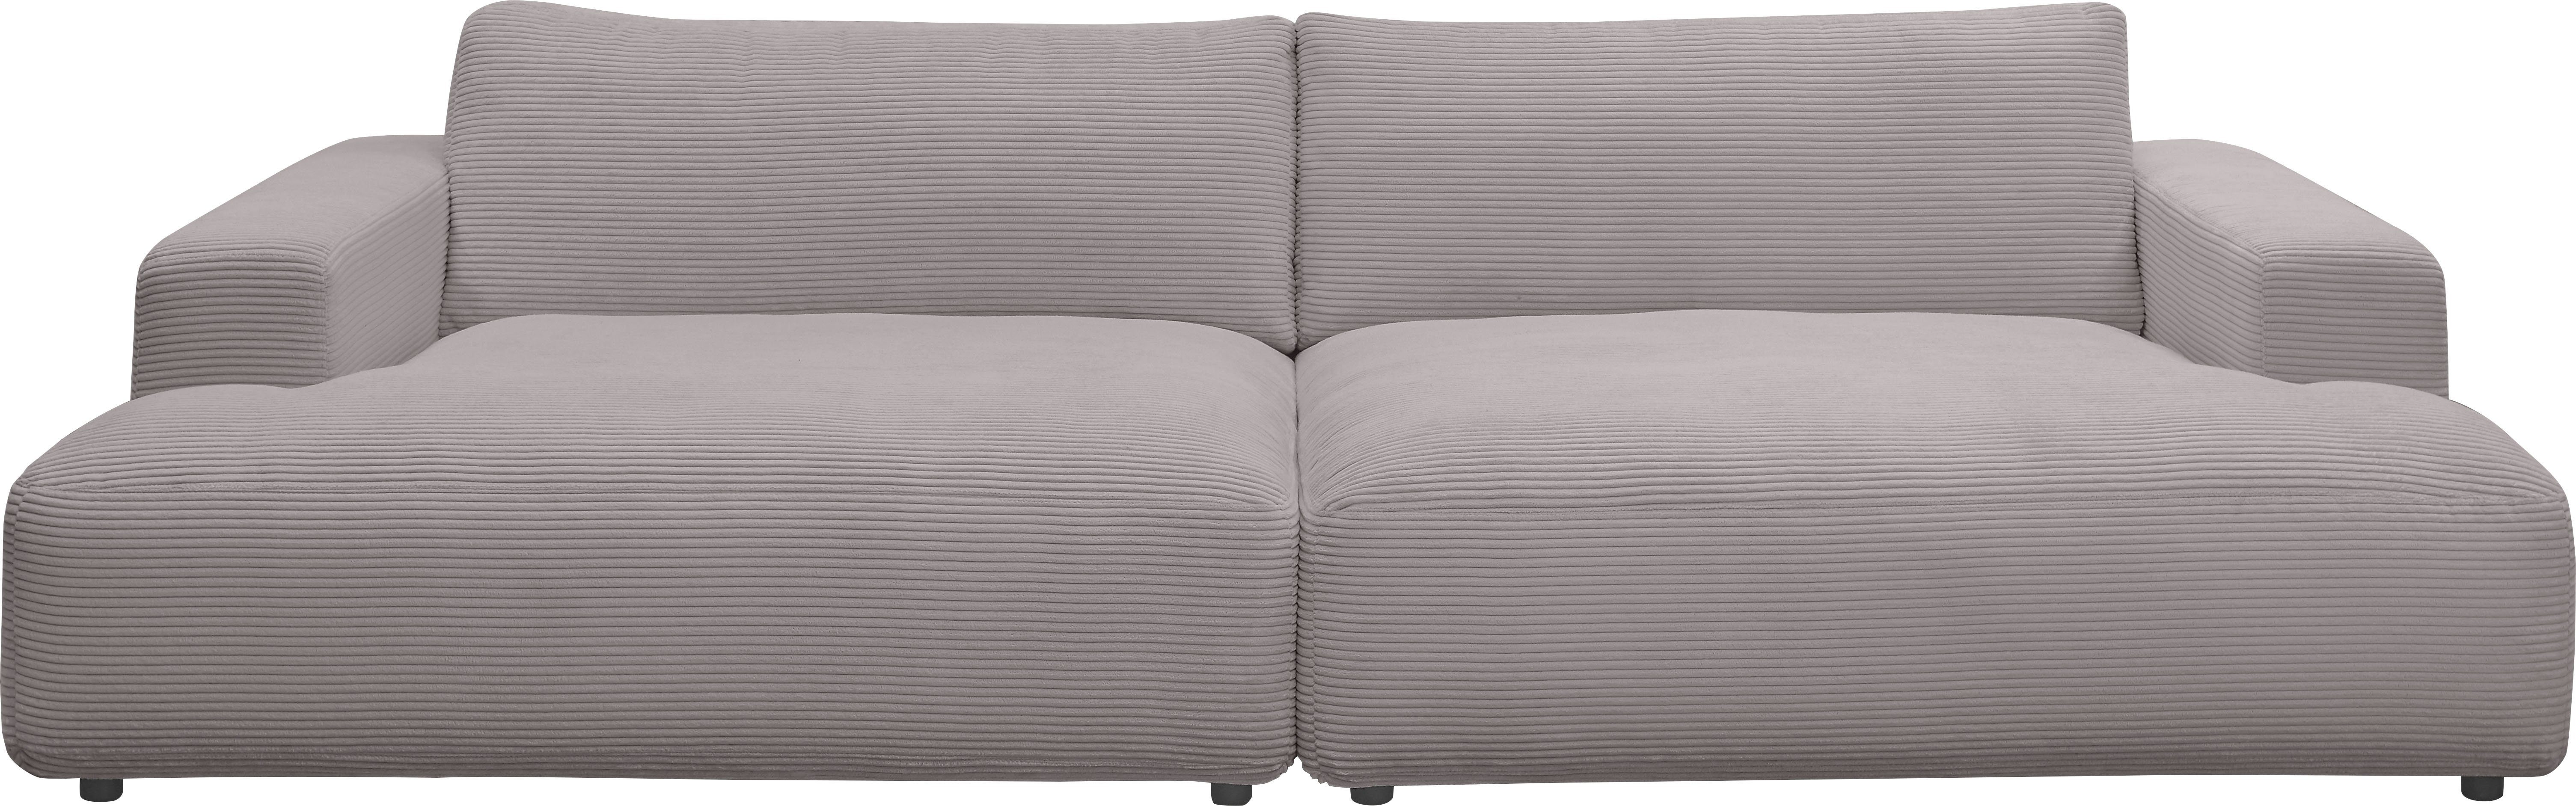 cm by Cord-Bezug, Loungesofa grey 292 Lucia, Musterring branded GALLERY Breite M